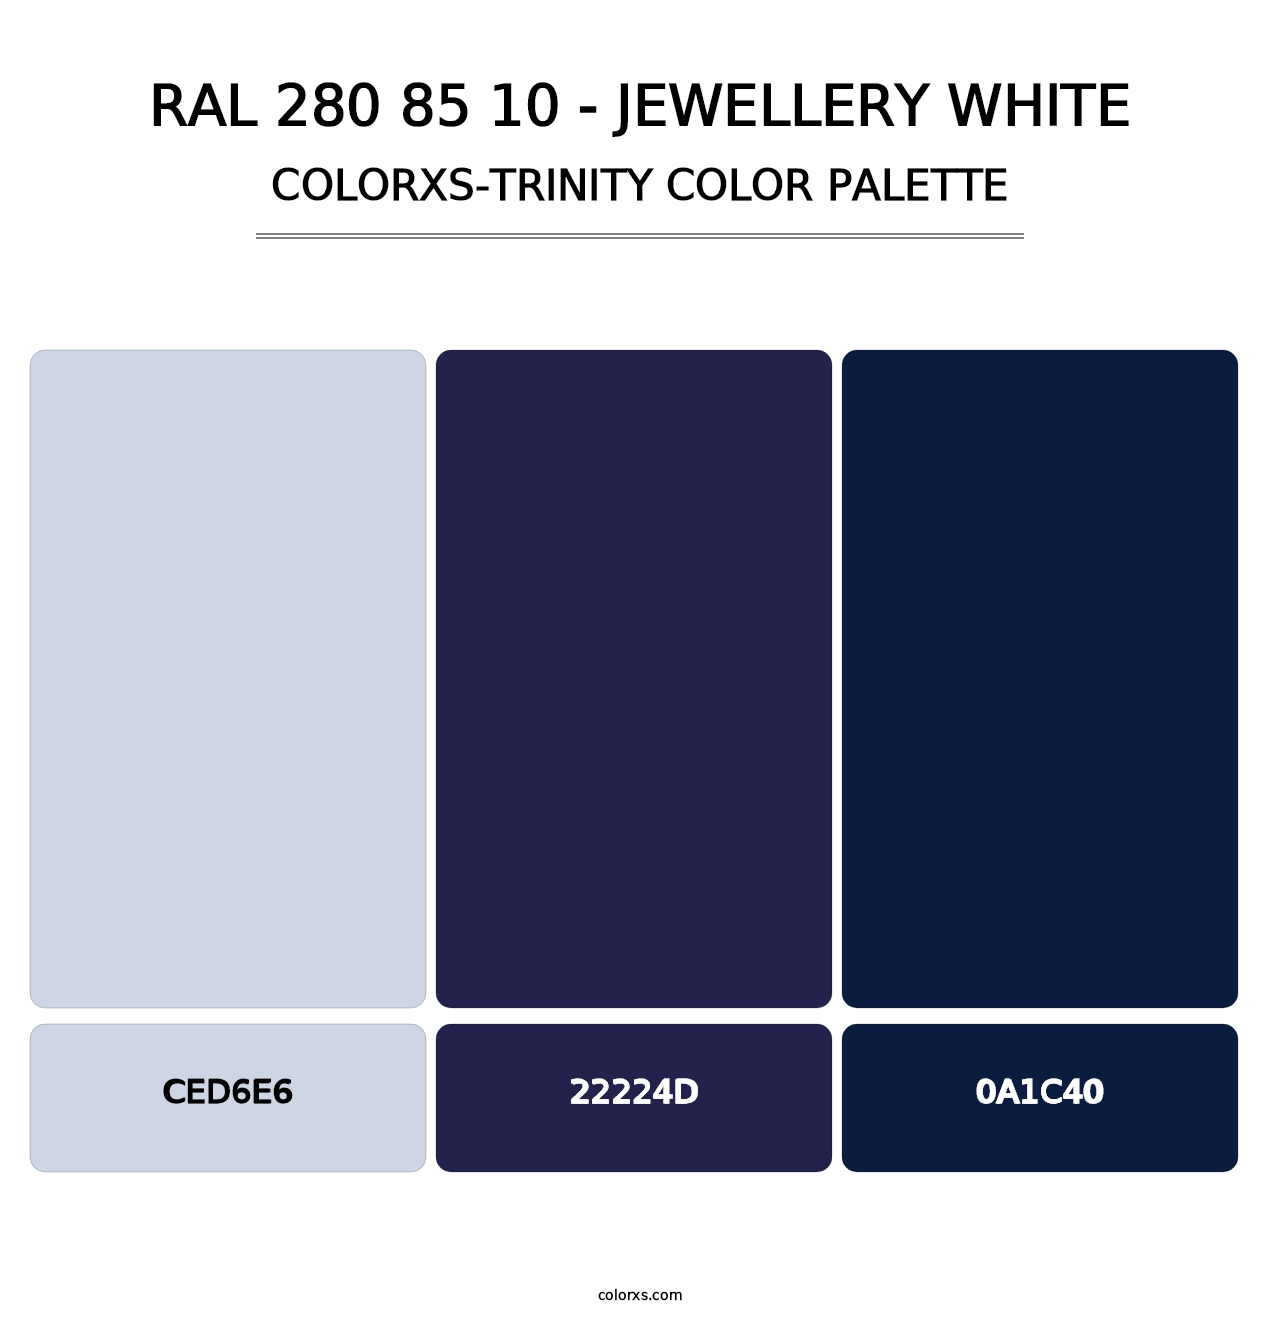 RAL 280 85 10 - Jewellery White - Colorxs Trinity Palette